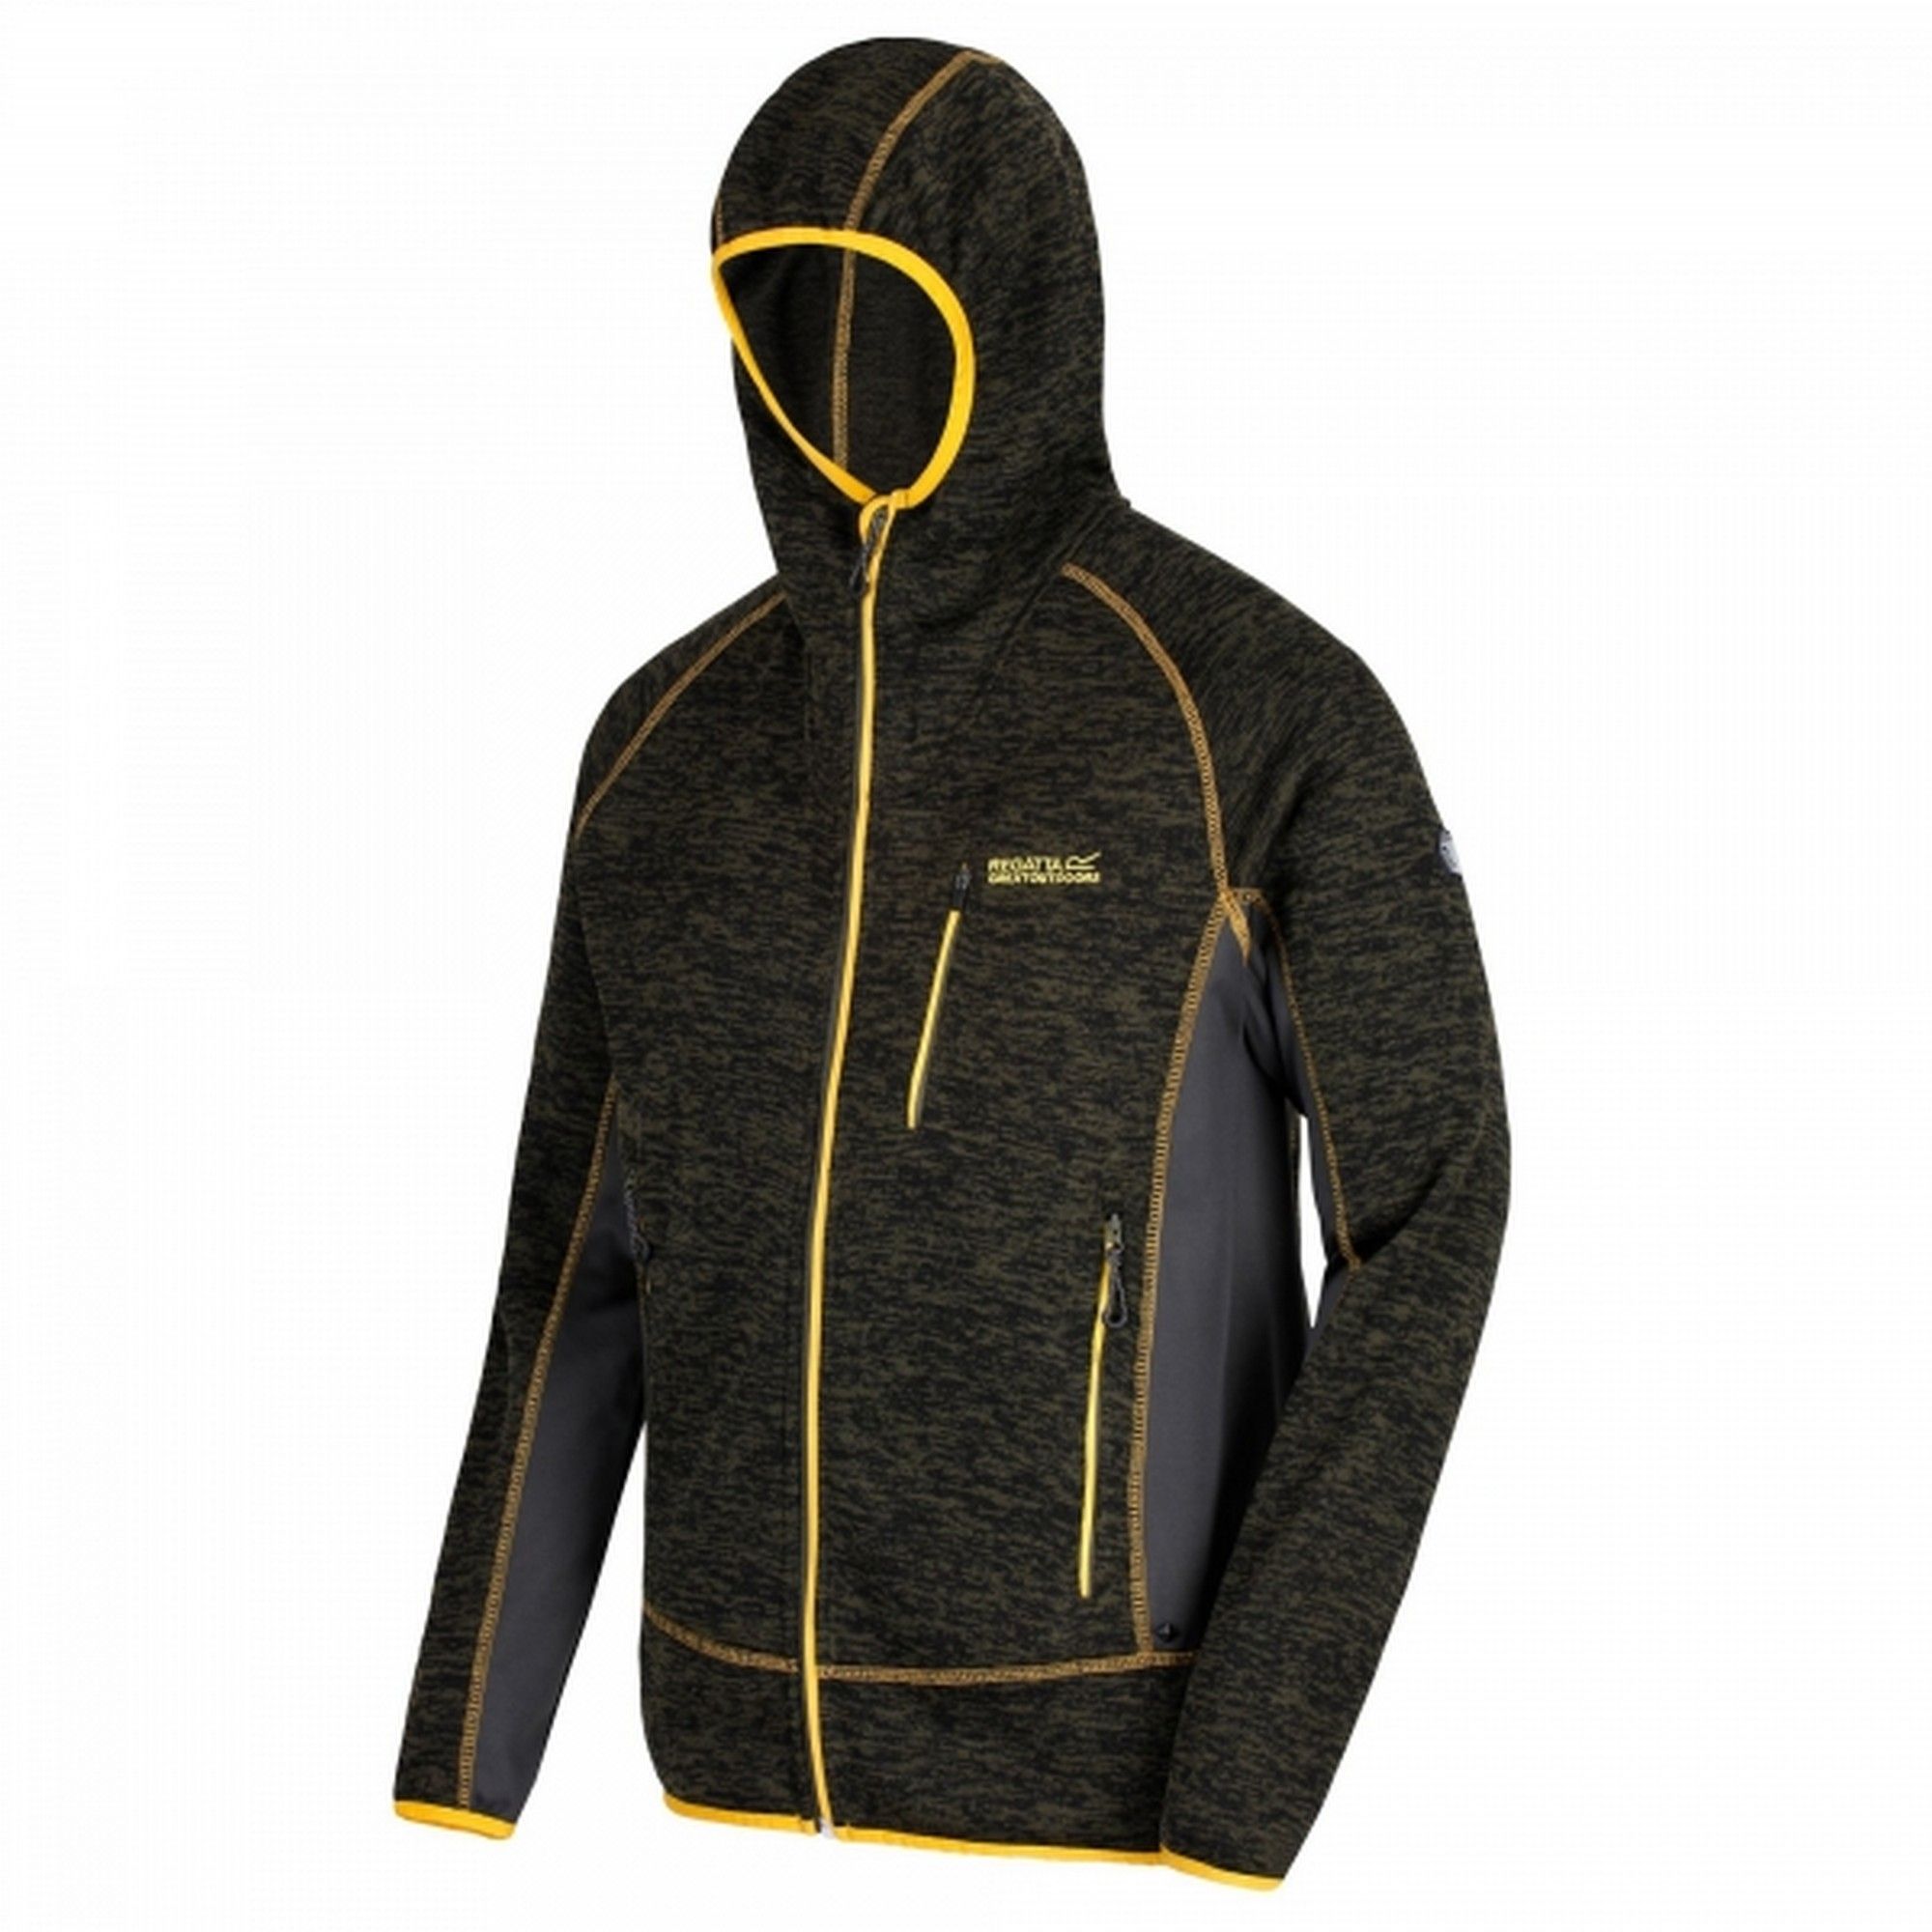 Mens hooded jacket made of 265gsm Polyester marl knit effect fleece. Extol stretch side, hood and underarm panels. Grown on hood. 2 zipped lower pockets and 1 zipped chest pocket. Stretch binding to hood opening, cuffs and hem. Ideal for wearing outdoors on a cold day. 100% Polyester.